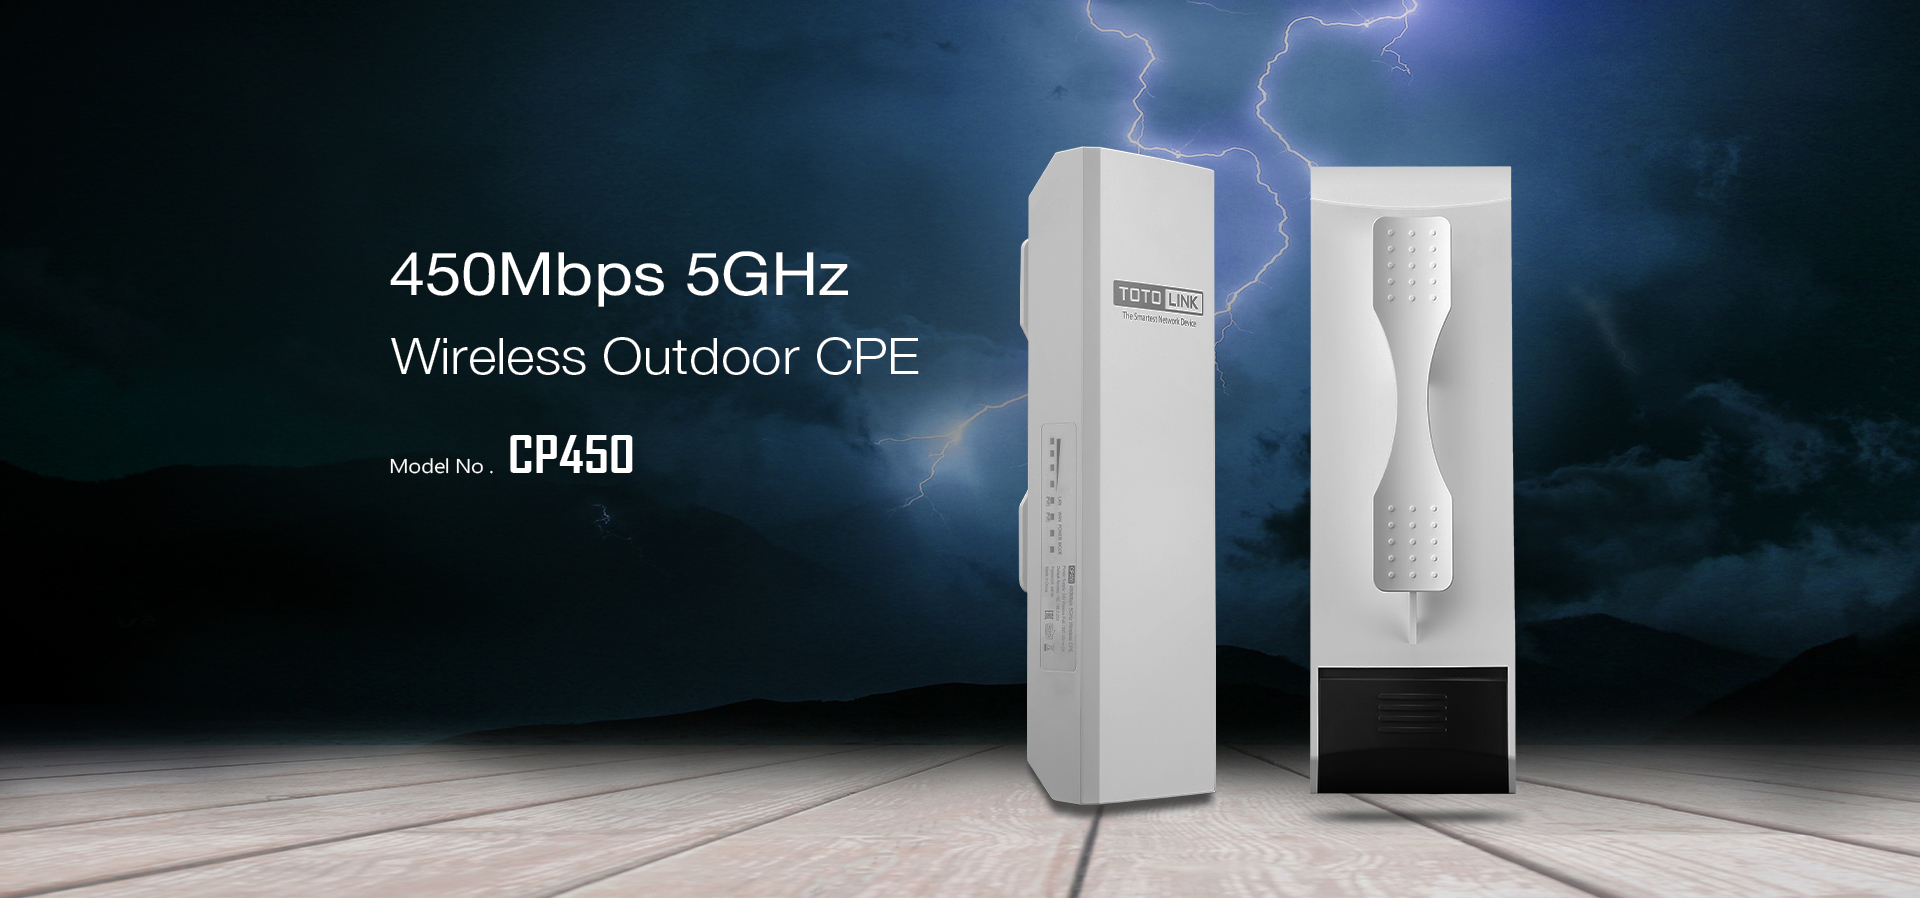 CP450L-450Mbps-5GHz-Wireless-Outdoor-AP-Client